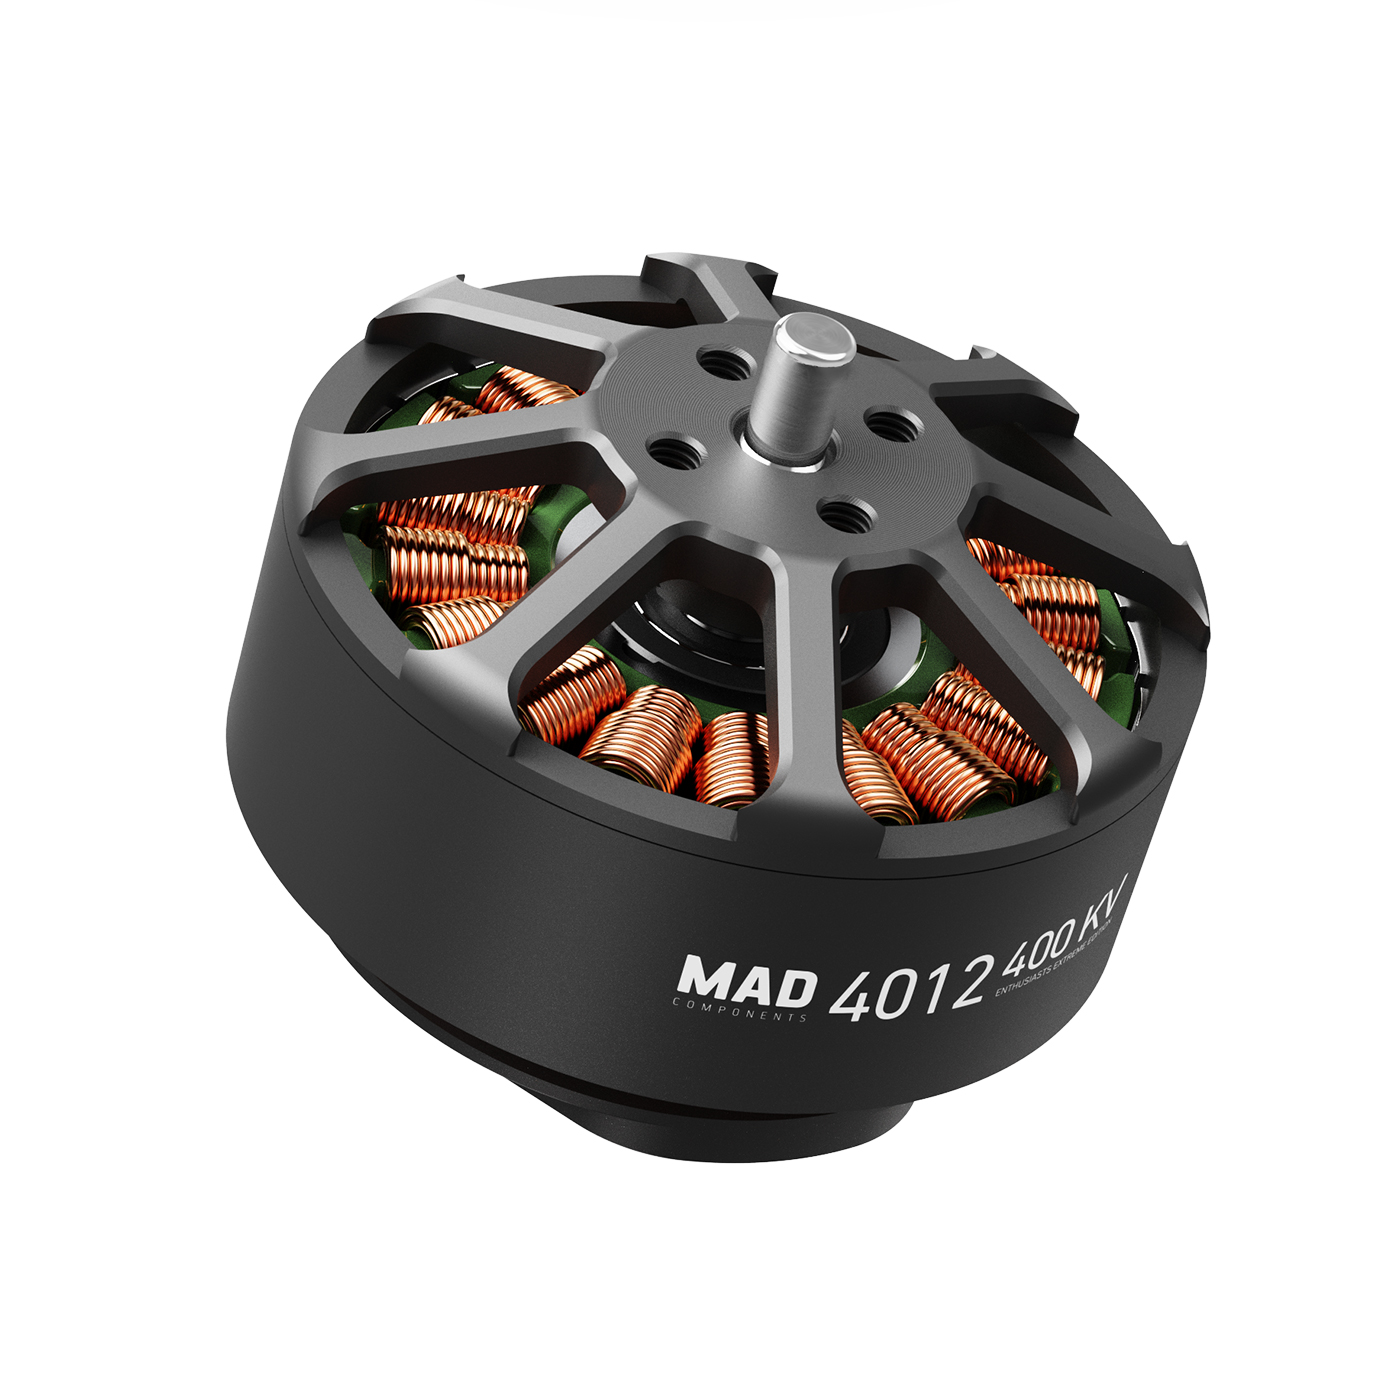 MAD 4012 EEE brushless motor for the long-range inspection drone mapping drone surveying drone quadcopter hexcopter mulitirotor